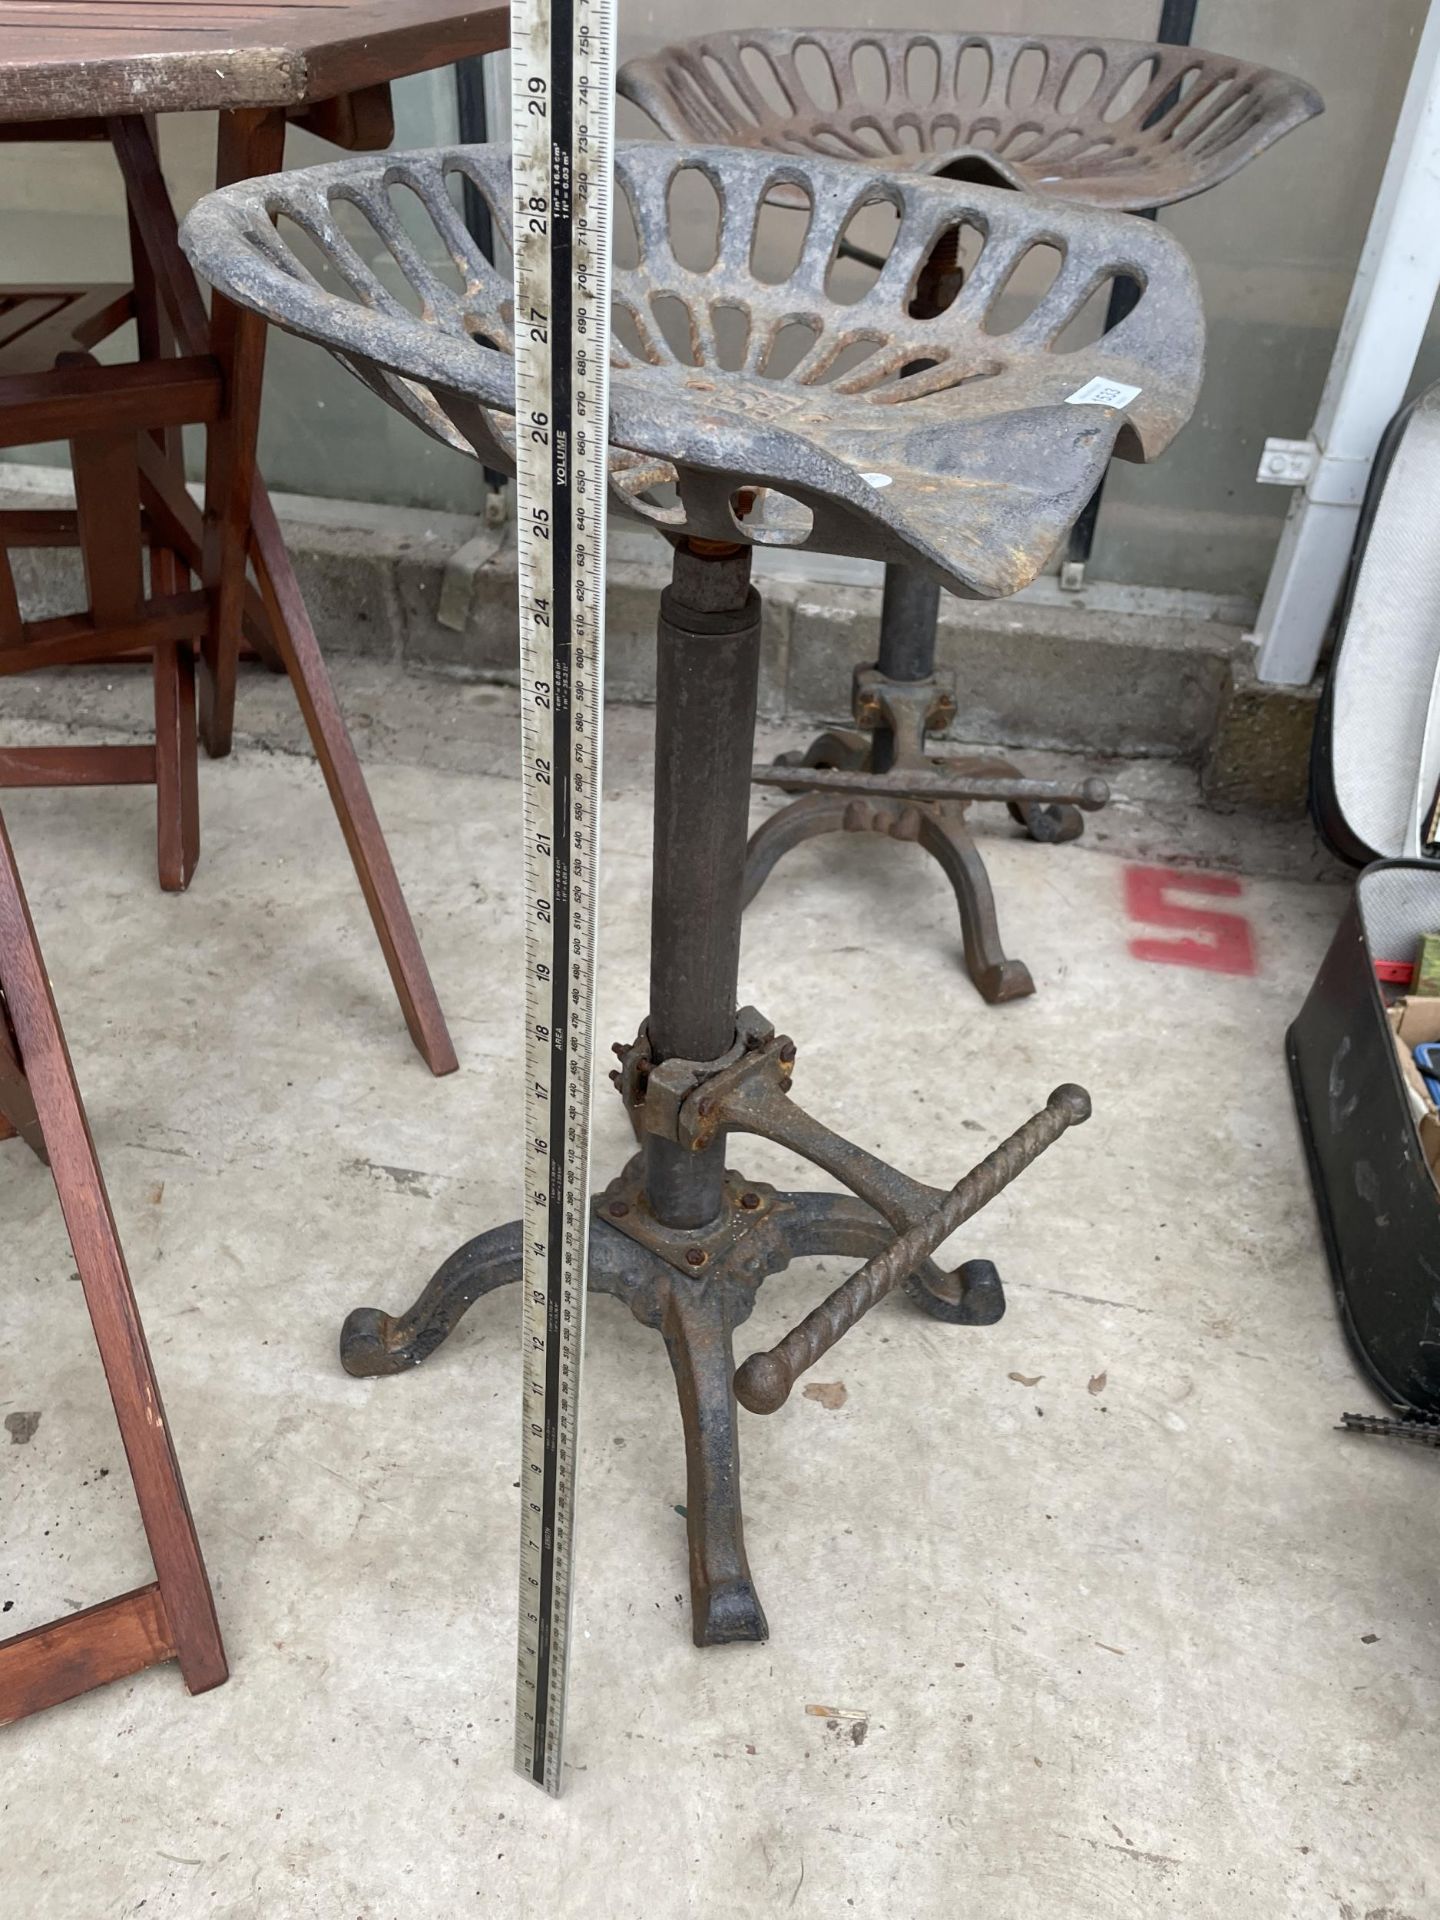 A PAIR OF VINTAGE INDUSTRIAL STYLE STOOLS WITH IMPLEMENT SEATS - Image 4 of 5